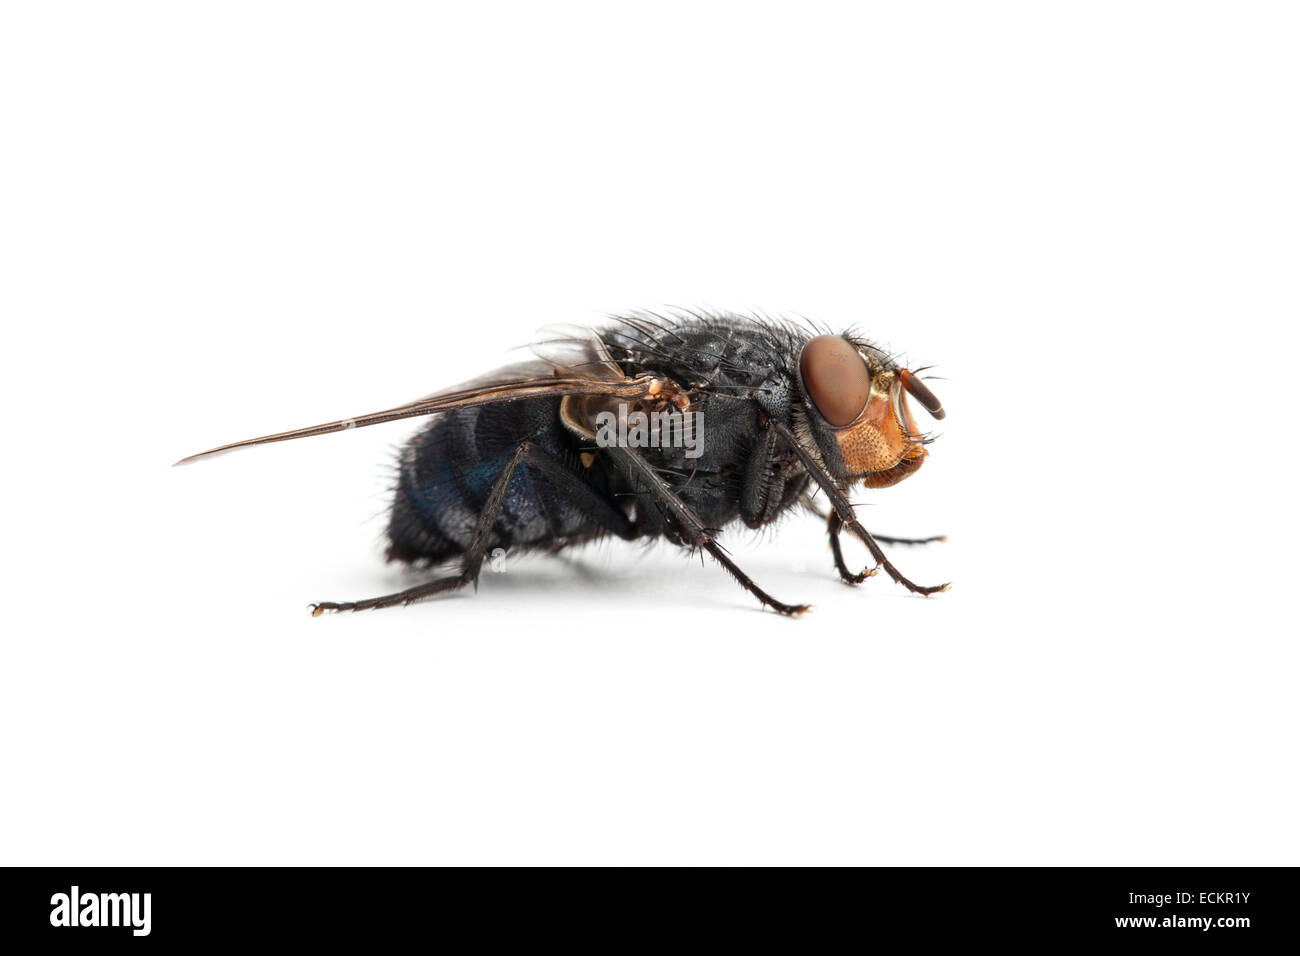 Blowfly, Calliphora species, on a white background Stock Photo